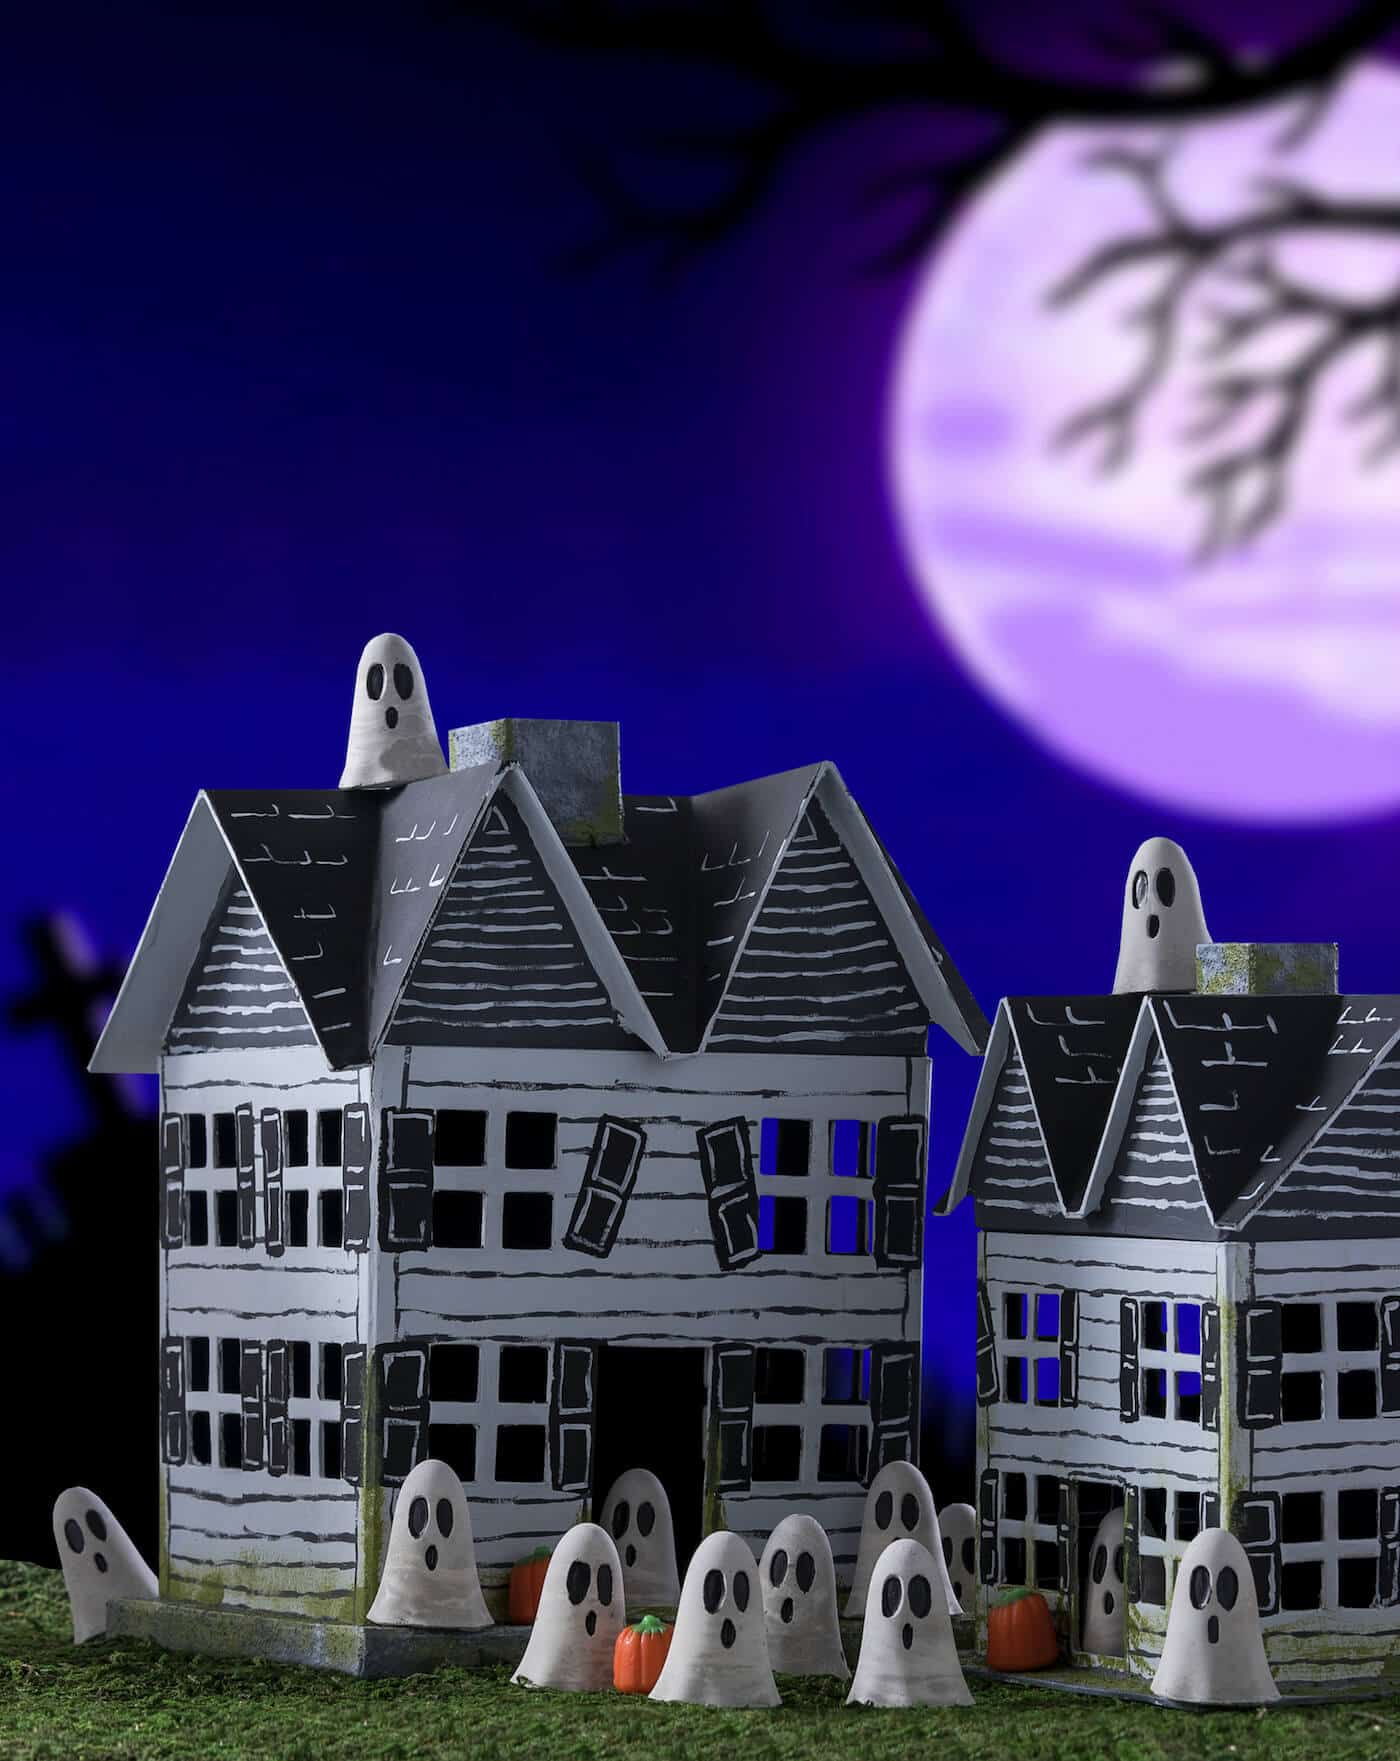 Use Quikcrete, paper mache houses, acrylic paint, and a few other supplies to create a spooky village for Halloween! Kids will love to participate too.